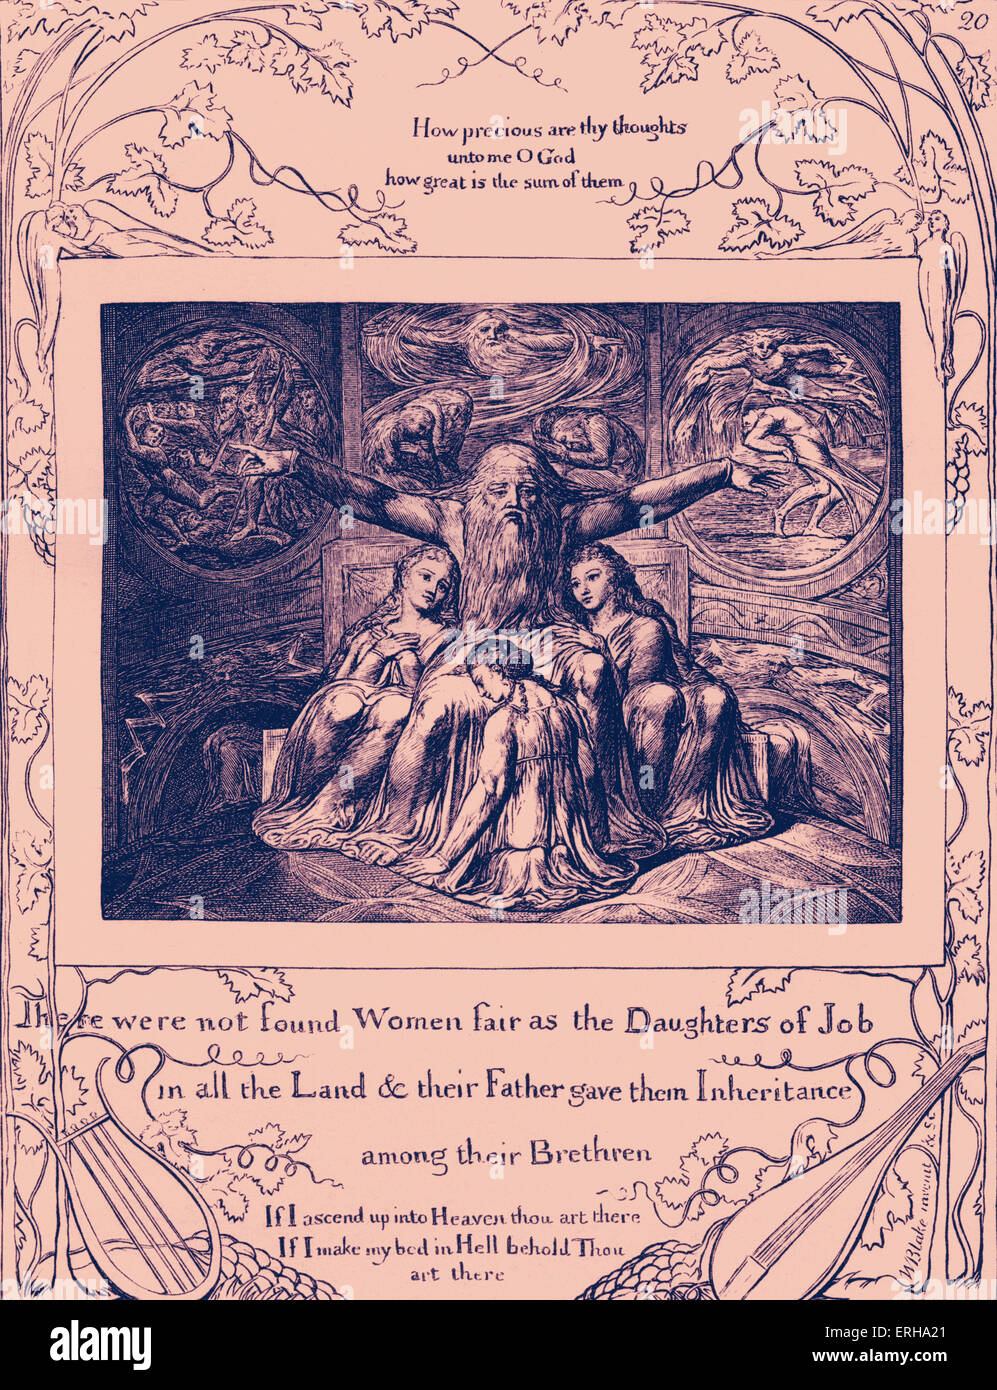 Job Recounting his Experience to his Daughters by William Blake, from the illustrations of the Book of Job, 1825. Captions read: 'How precious are thy thoughts unto me O God, how great is the sum of them'; 'There were not found Women fair as the Daughters of Job in all the Land and their Father gave them Inheritance among their Brethren'; 'If I ascend up into Heaven thou art there, If I make my bed in Hell behold thou art there'. English poet, painter and printmaker: 28 November 1757 — 12 August 1827. Stock Photo